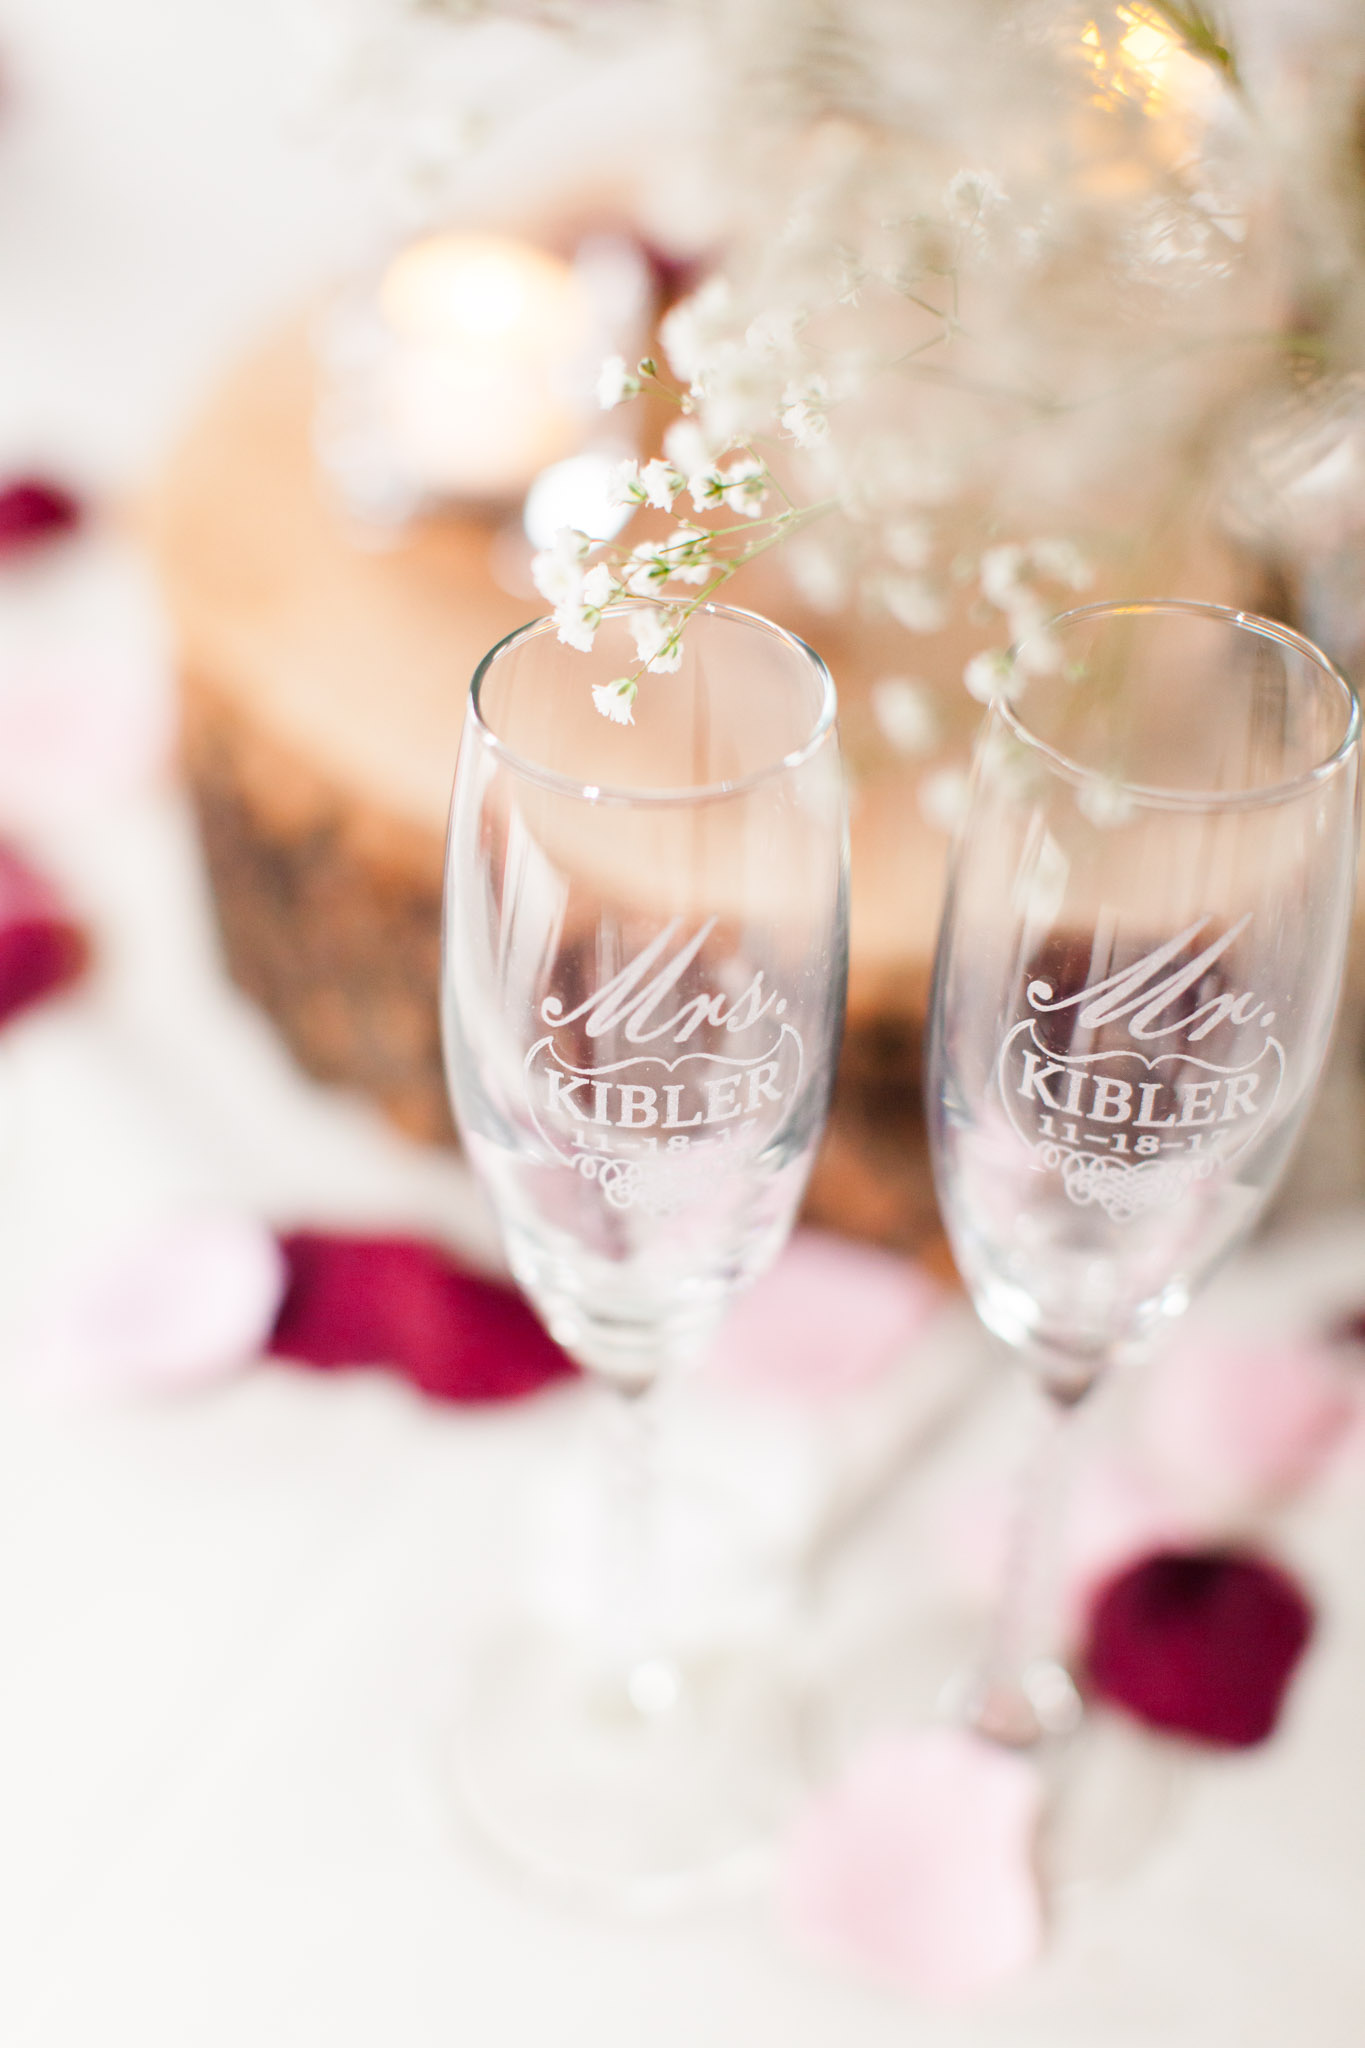 Mr. and Mrs. Champagne glasses on wedding day .